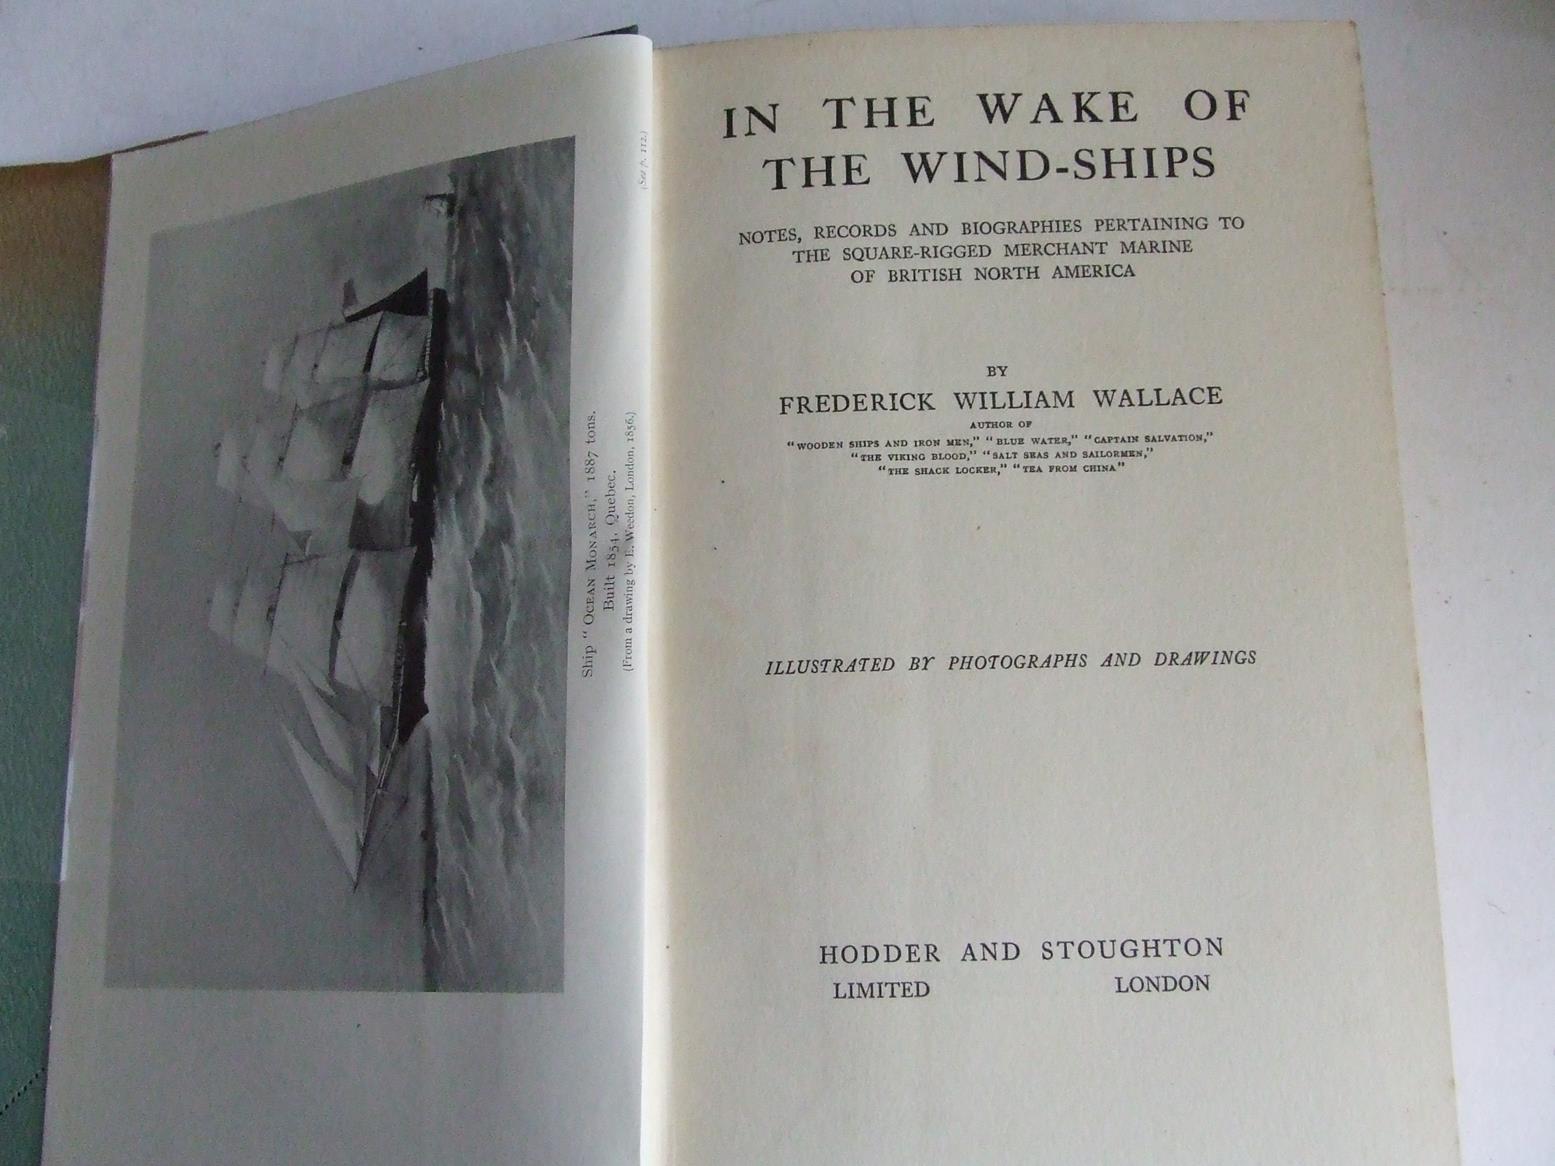 In The Wake of the Wind-Ships